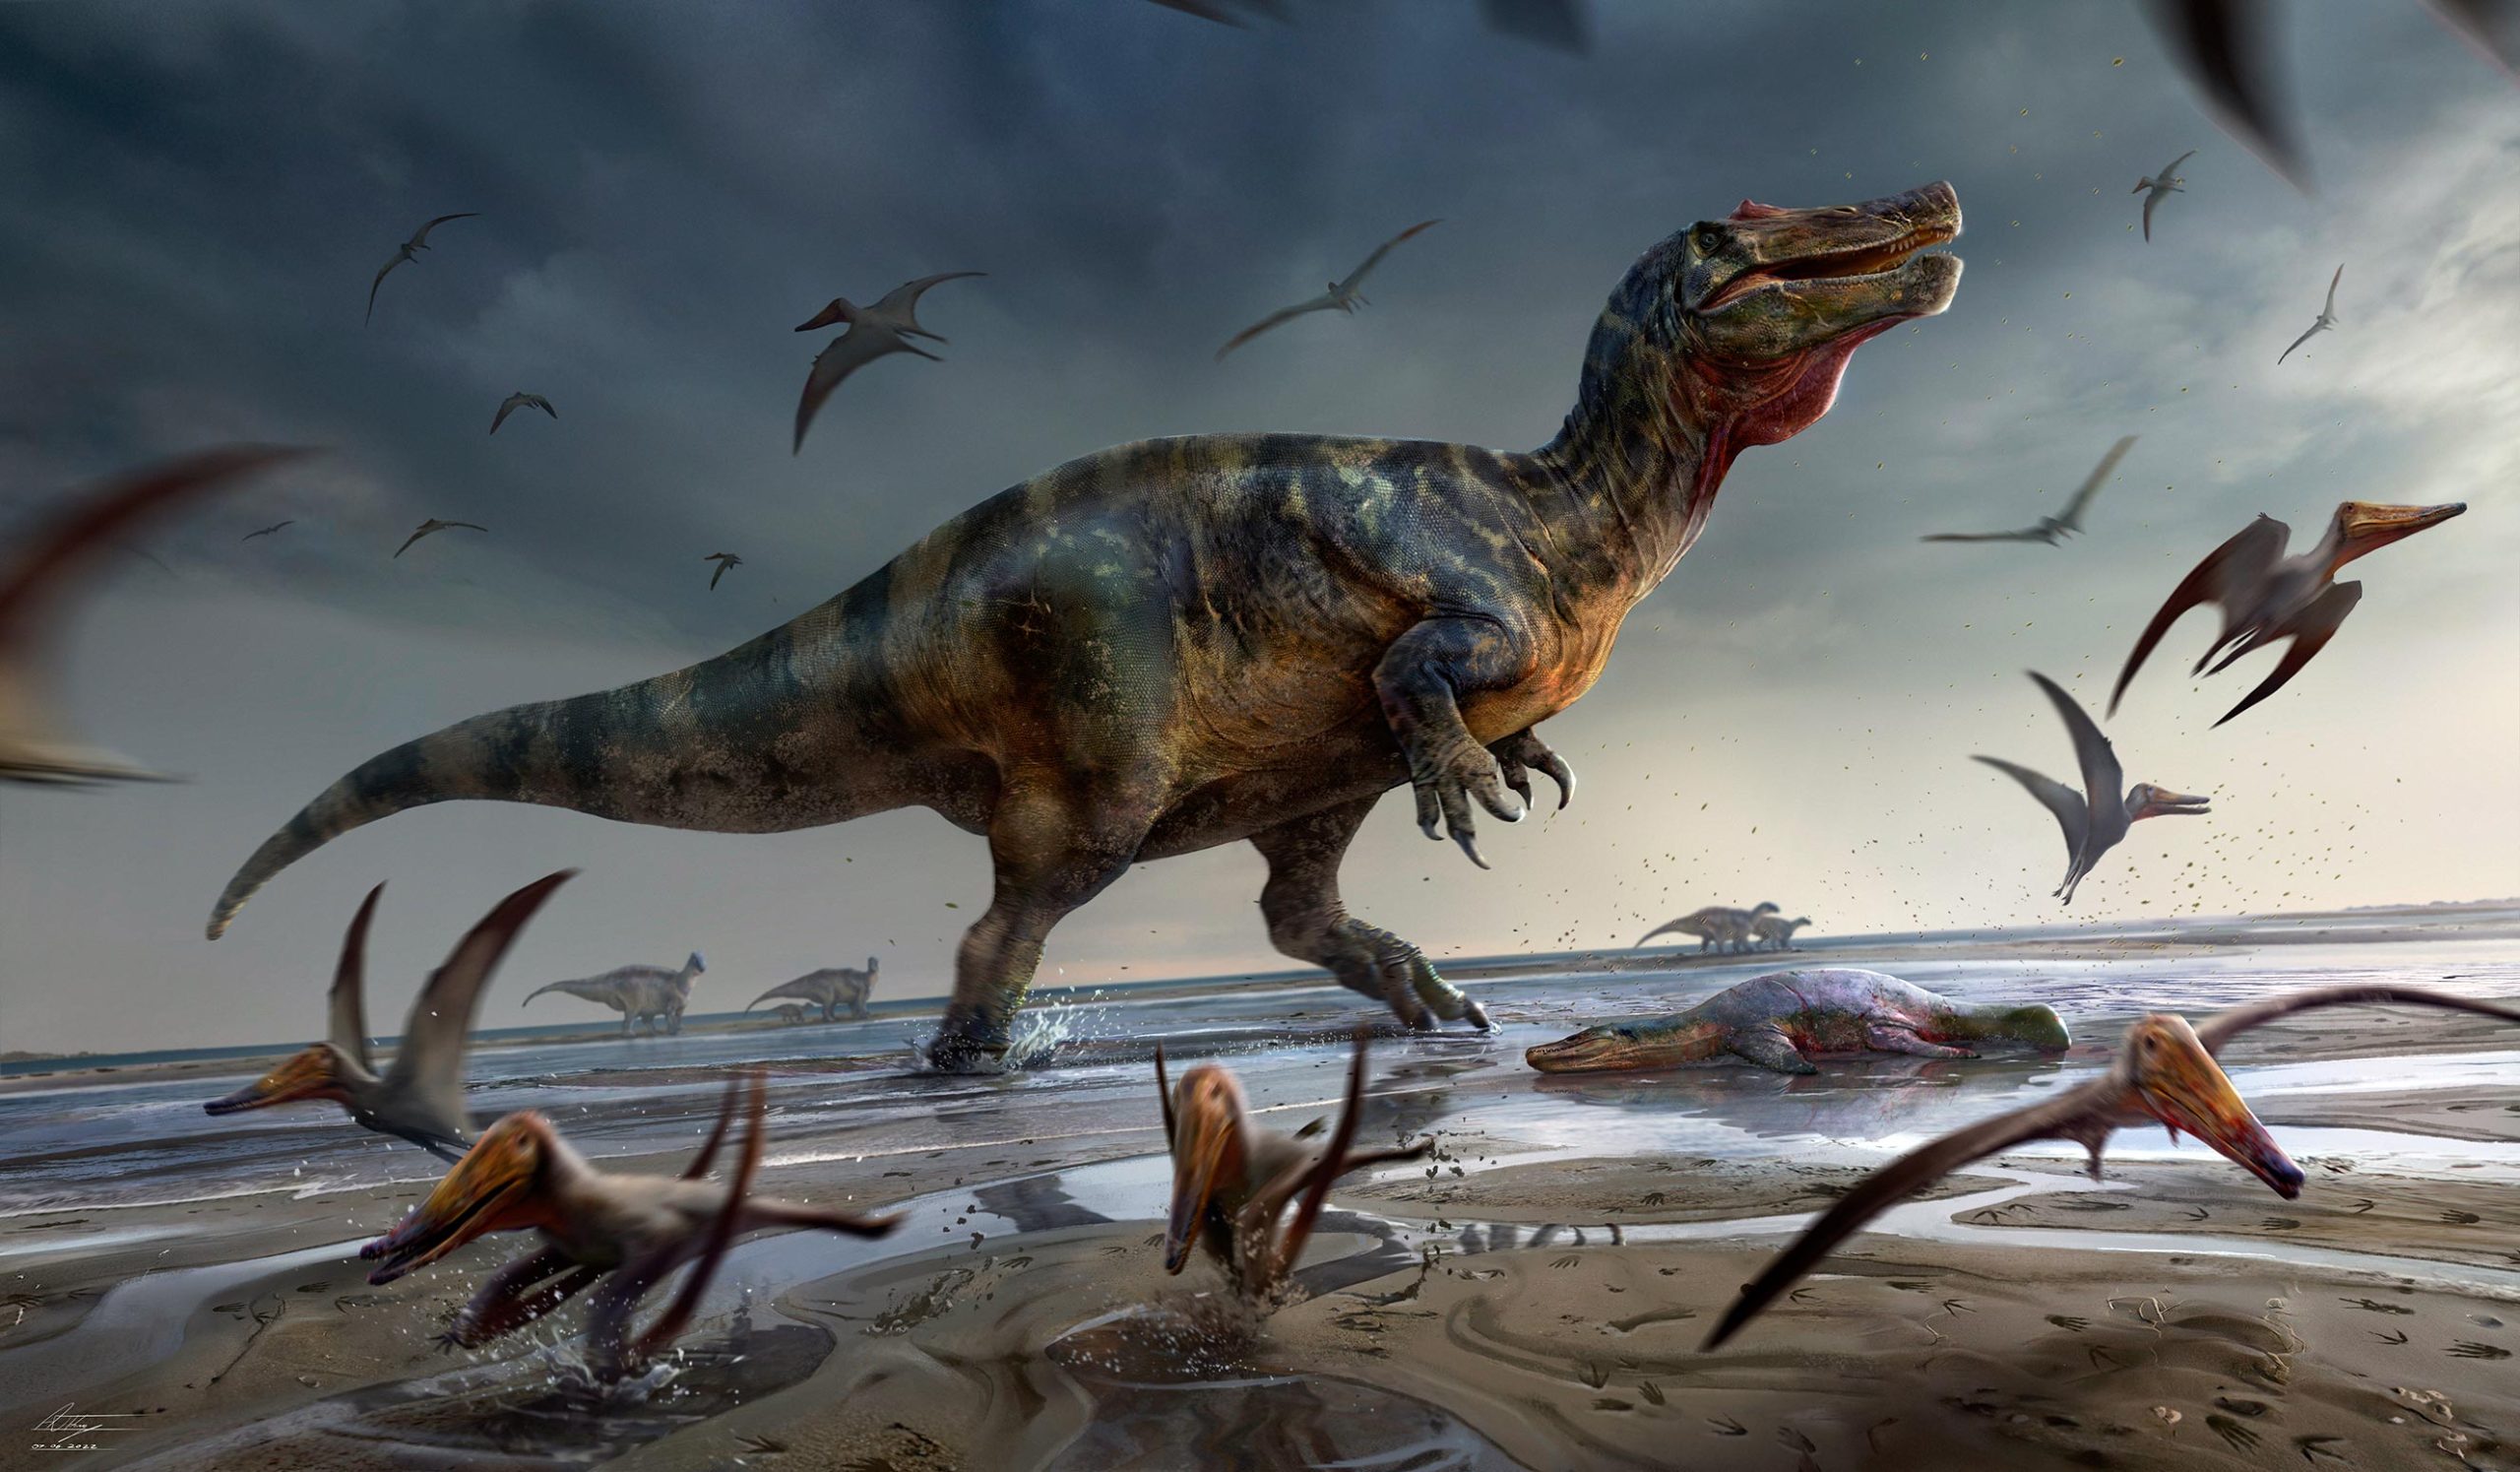 Europe's Largest Predatory Dinosaur Unearthed on the Isle of Wight